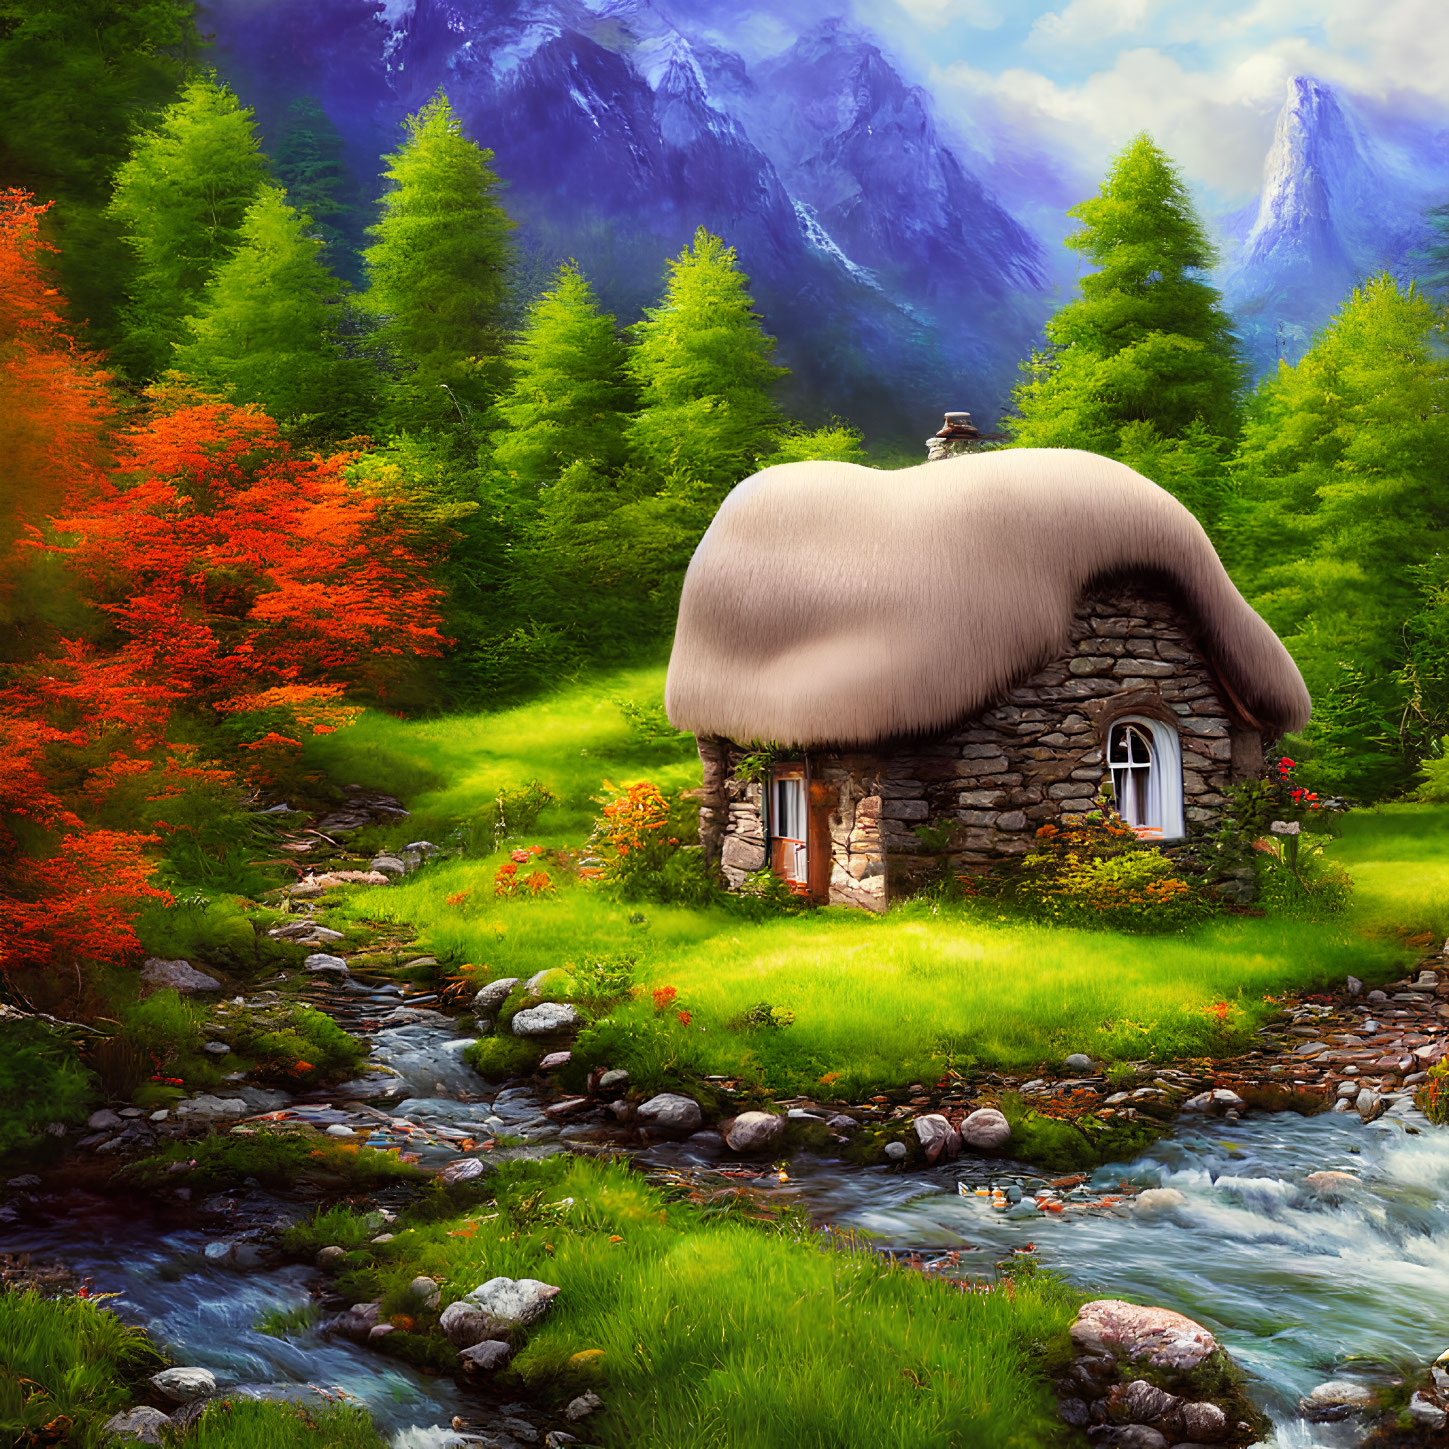 Stone Cottage with Thatched Roof by Stream in Colorful Forest